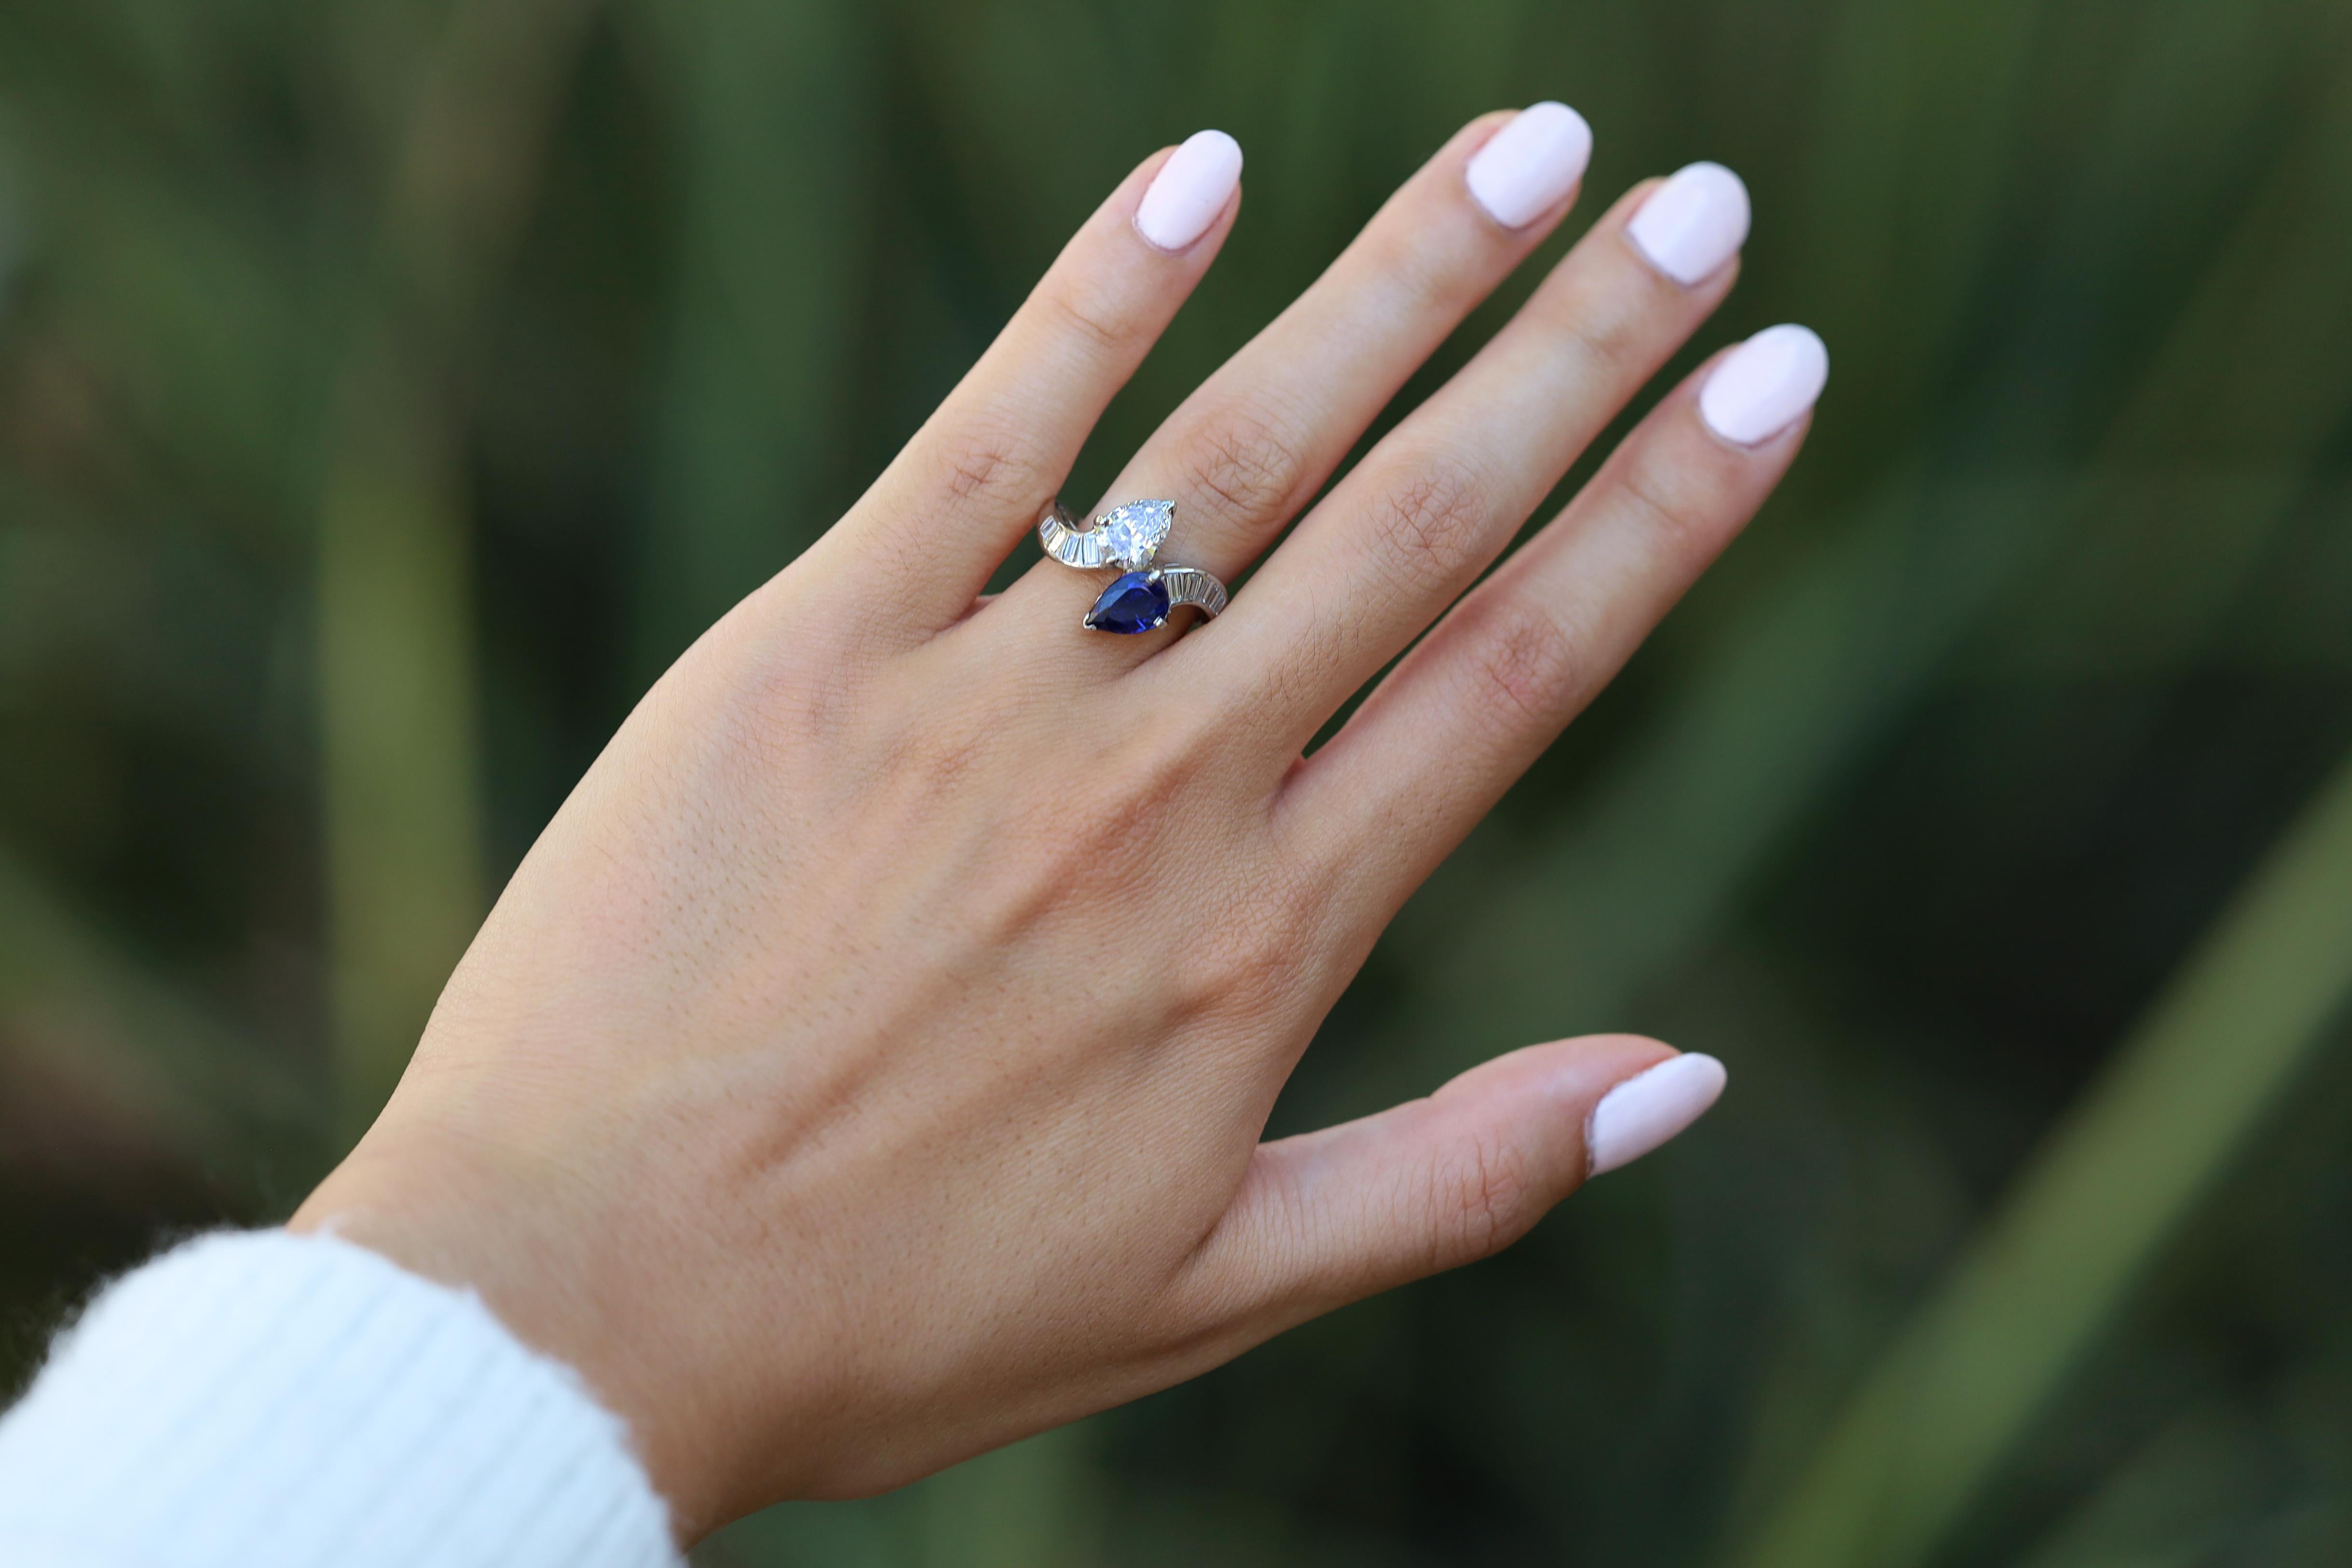 An absolutely embraceable 1920's Jazz Age diamond and sapphire Toi Et Moi ring. Featuring the sleek, geometric architecture you would expect from an Art Deco masterpiece, along with a GIA pedigree on the central pear shape diamond. Totaling 2.88